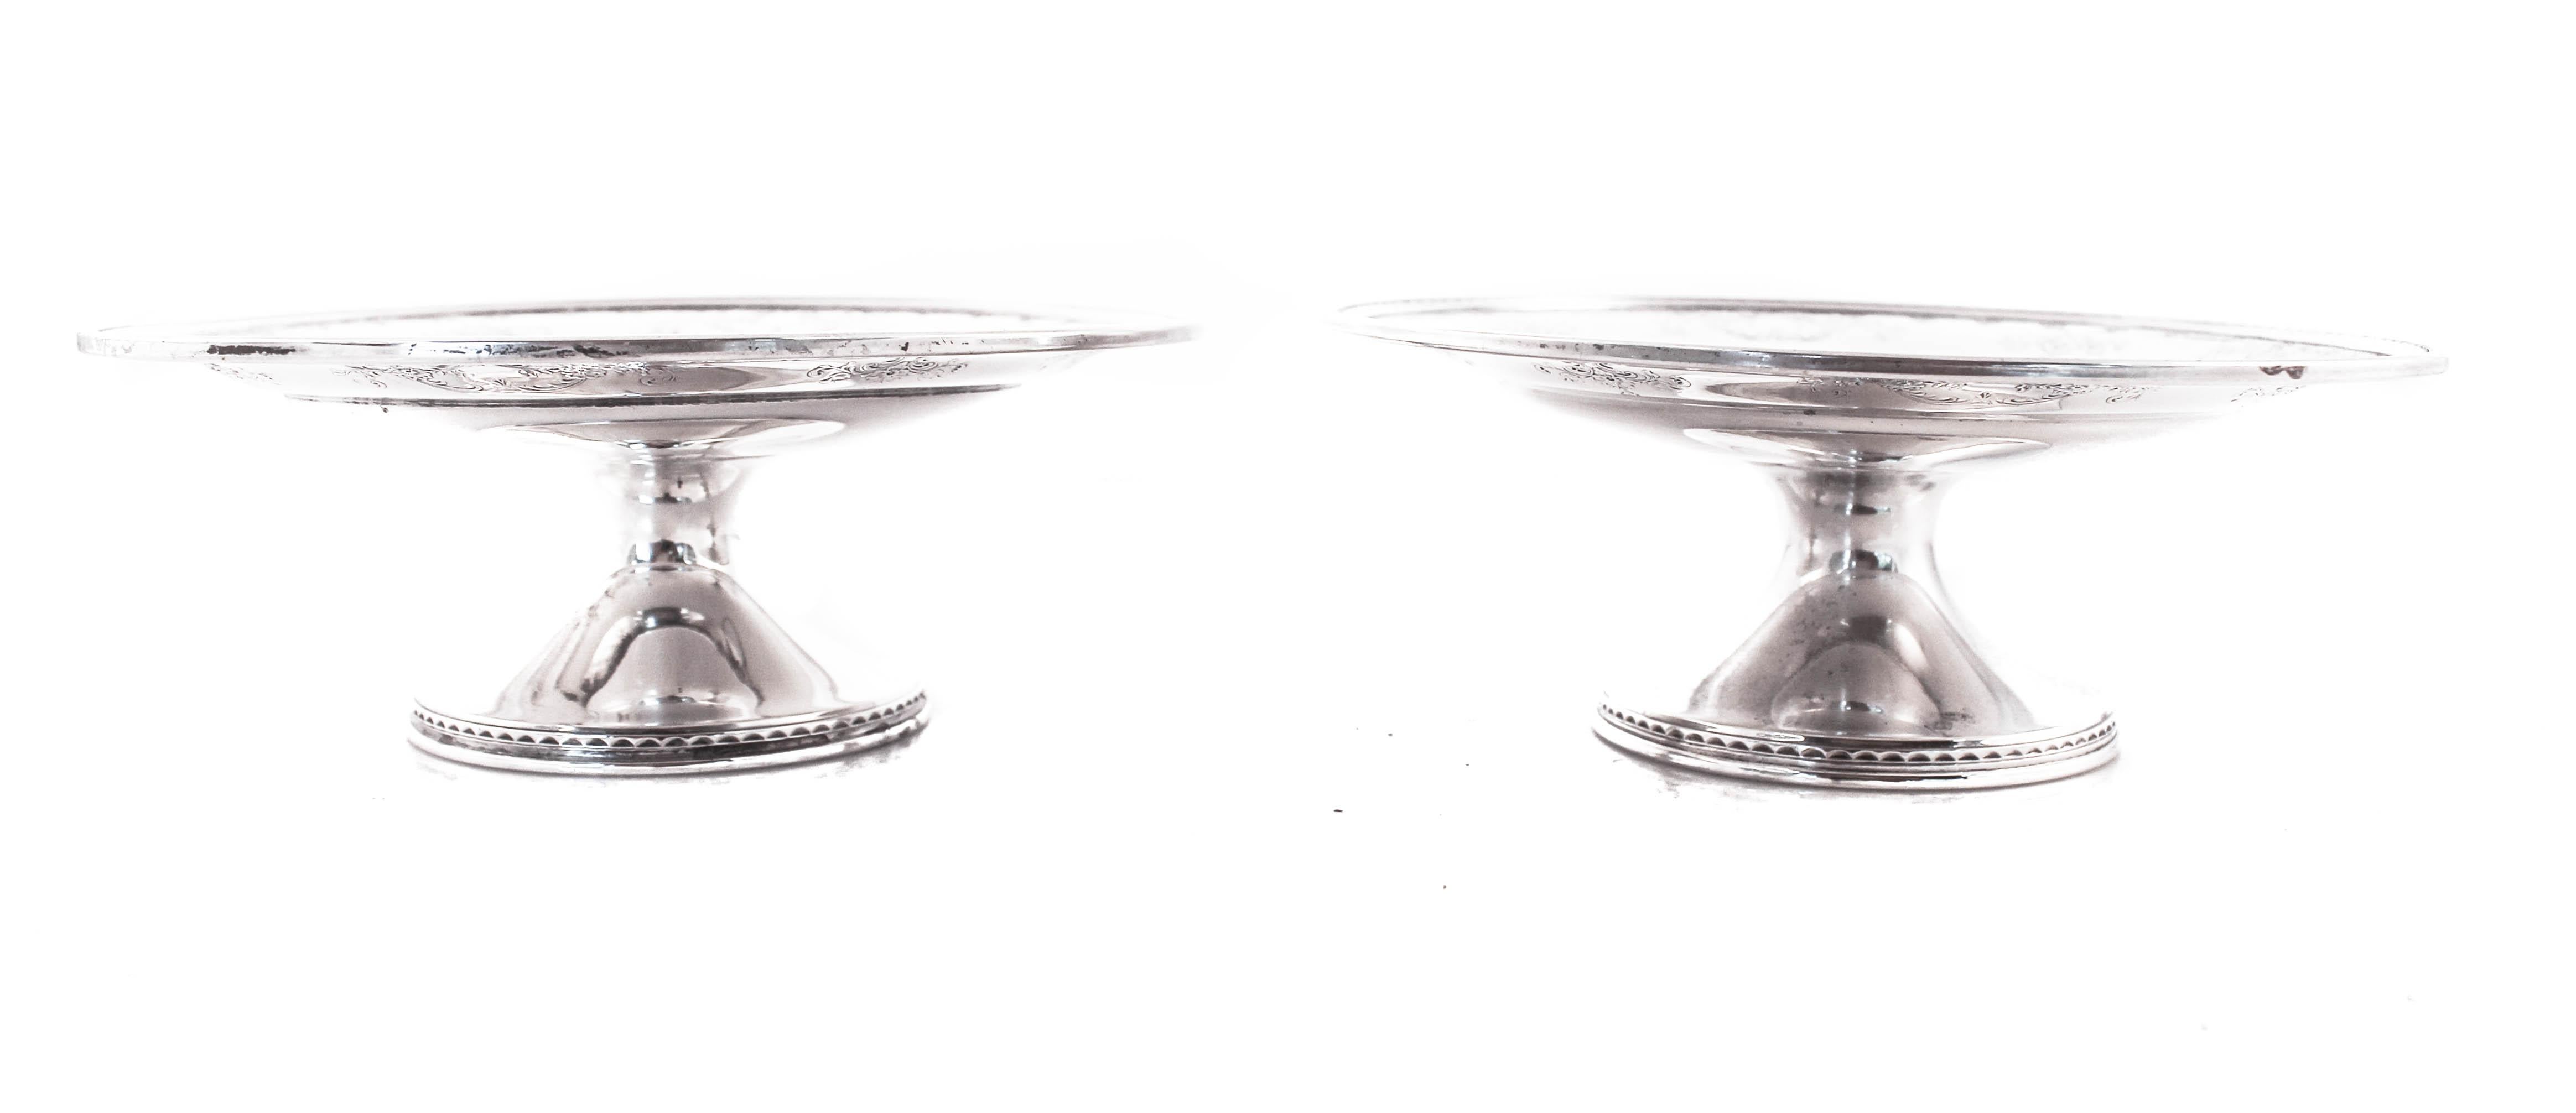 We are delighted to offer this pair of sterling silver compotes by Dominick and Haff of New York City. They have old-world charm; garlands, bows and other decorative etchings grace the other edge of each compote. In the center a hand engraved script